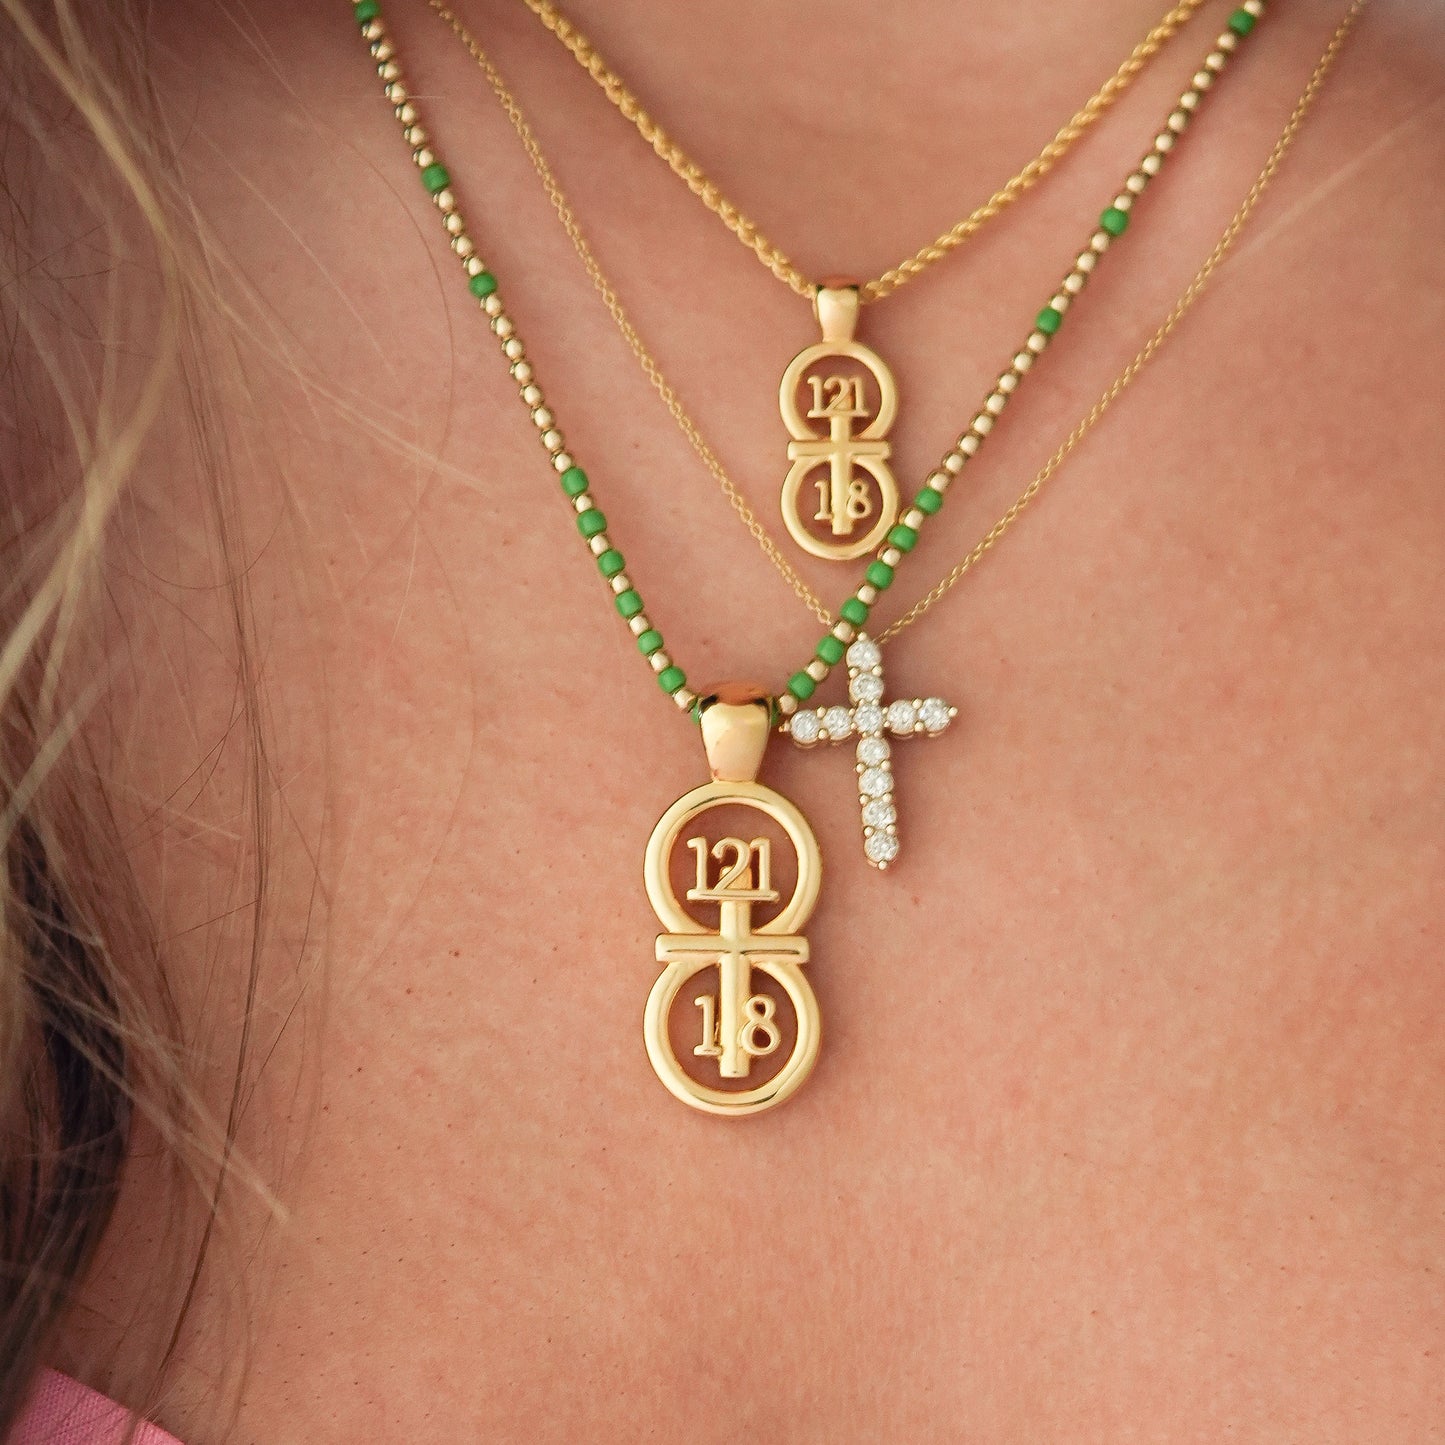 Lifestyle picture - three necklaces are displayed - our small Psalm 121:1-8 pendant on our 14k gold filled wheat chain, a diamond cross purchased from Croghan’s in Charleston, and our large Psalm 121:1-8 pendant on our hand beaded kelly green gold chain. The RIYAN 29 and 11® pendant has the numbers 121, 1, and 8 intertwined with the cross to represent Psalm 121:1-8 with the chapter word "Psalm" inscribed on the back.